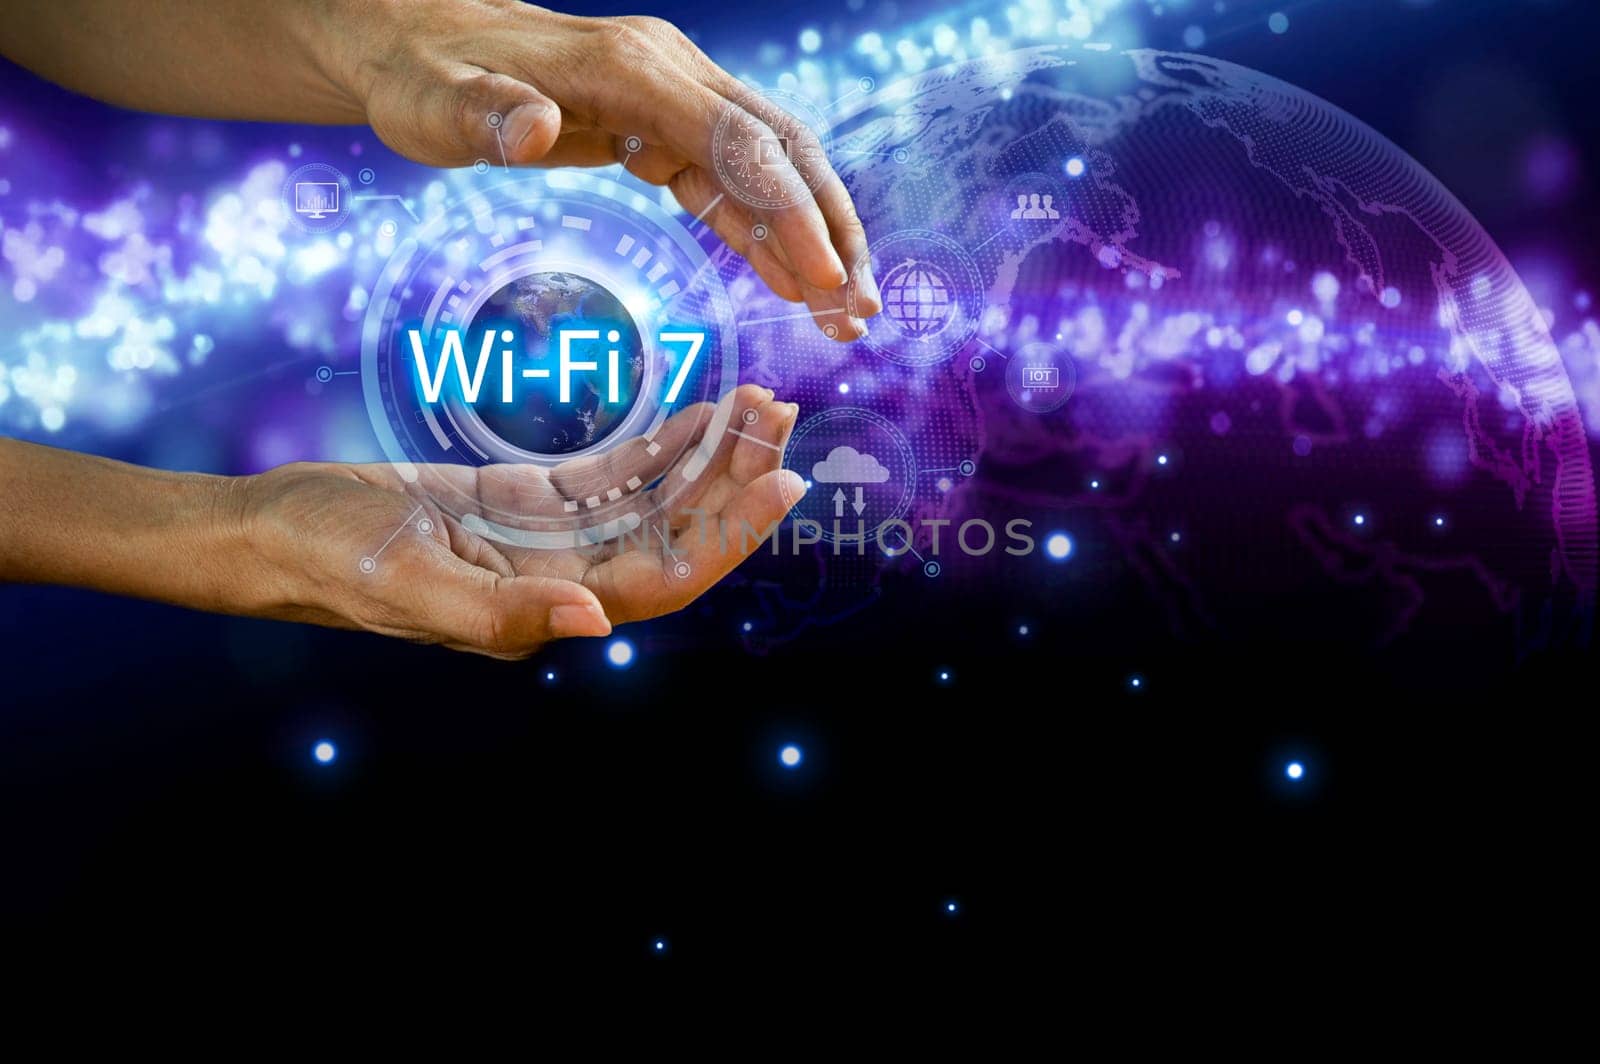 concept man using wifi technology 7 connected to the internet world with new technology